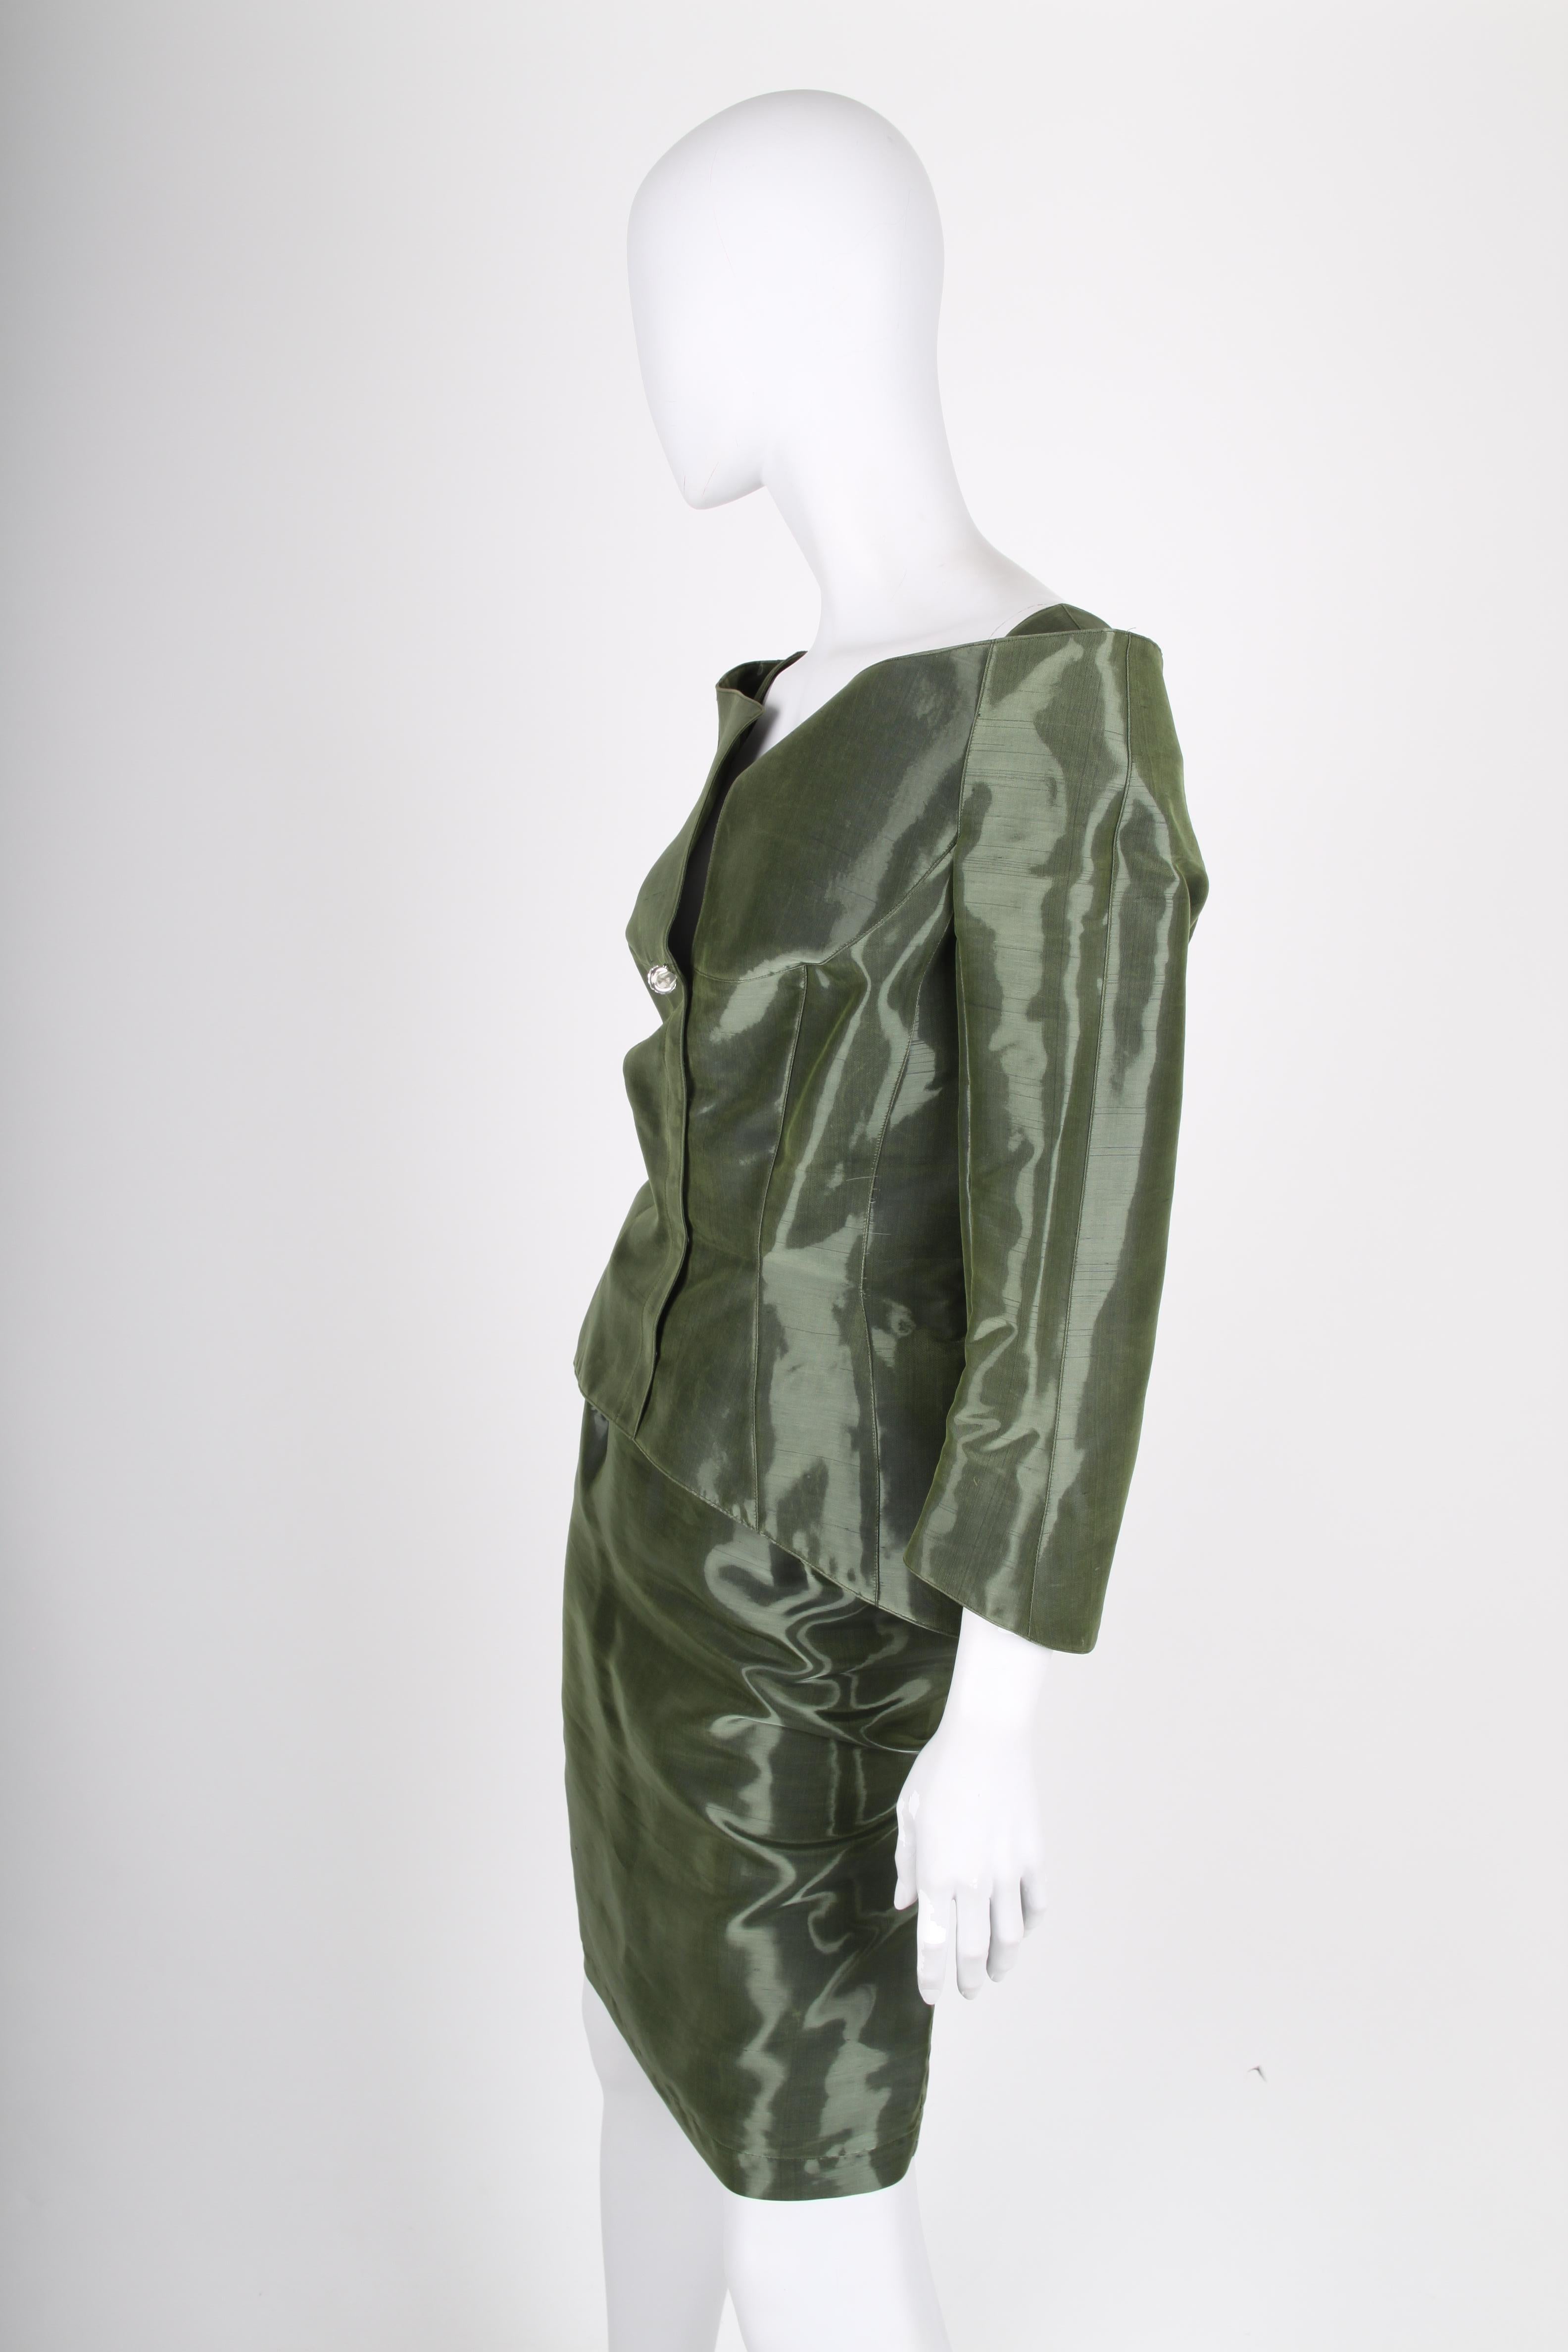 Two-piece suit by Thierry Mugler in olive green shimmery silk. A vintage dream!

The jacket has a wide neckline and front closure with concealed push buttons. Tailored fitting with 7/8 sleeves. Fully lined.

The skirt has a little less than